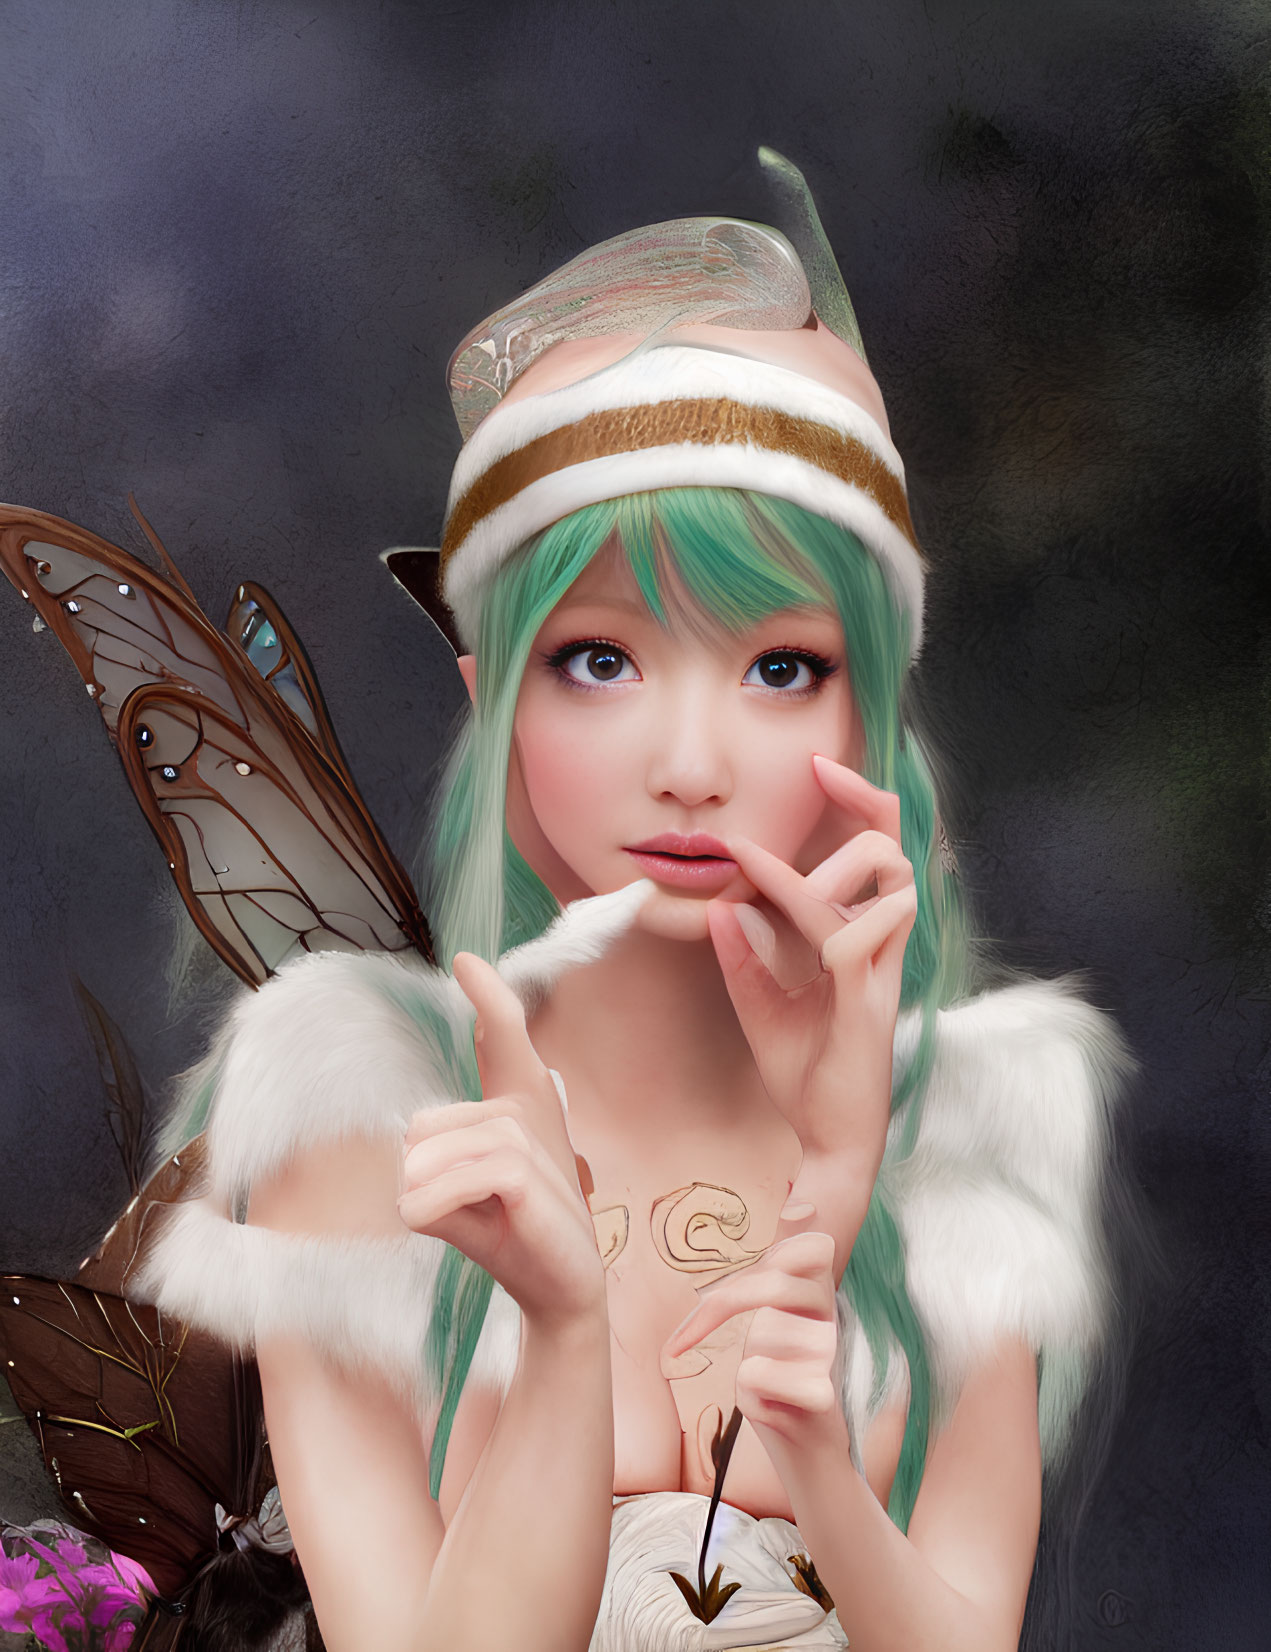 Fantastical image of female with teal hair and pointy ears, wearing fur hat and butterfly wing